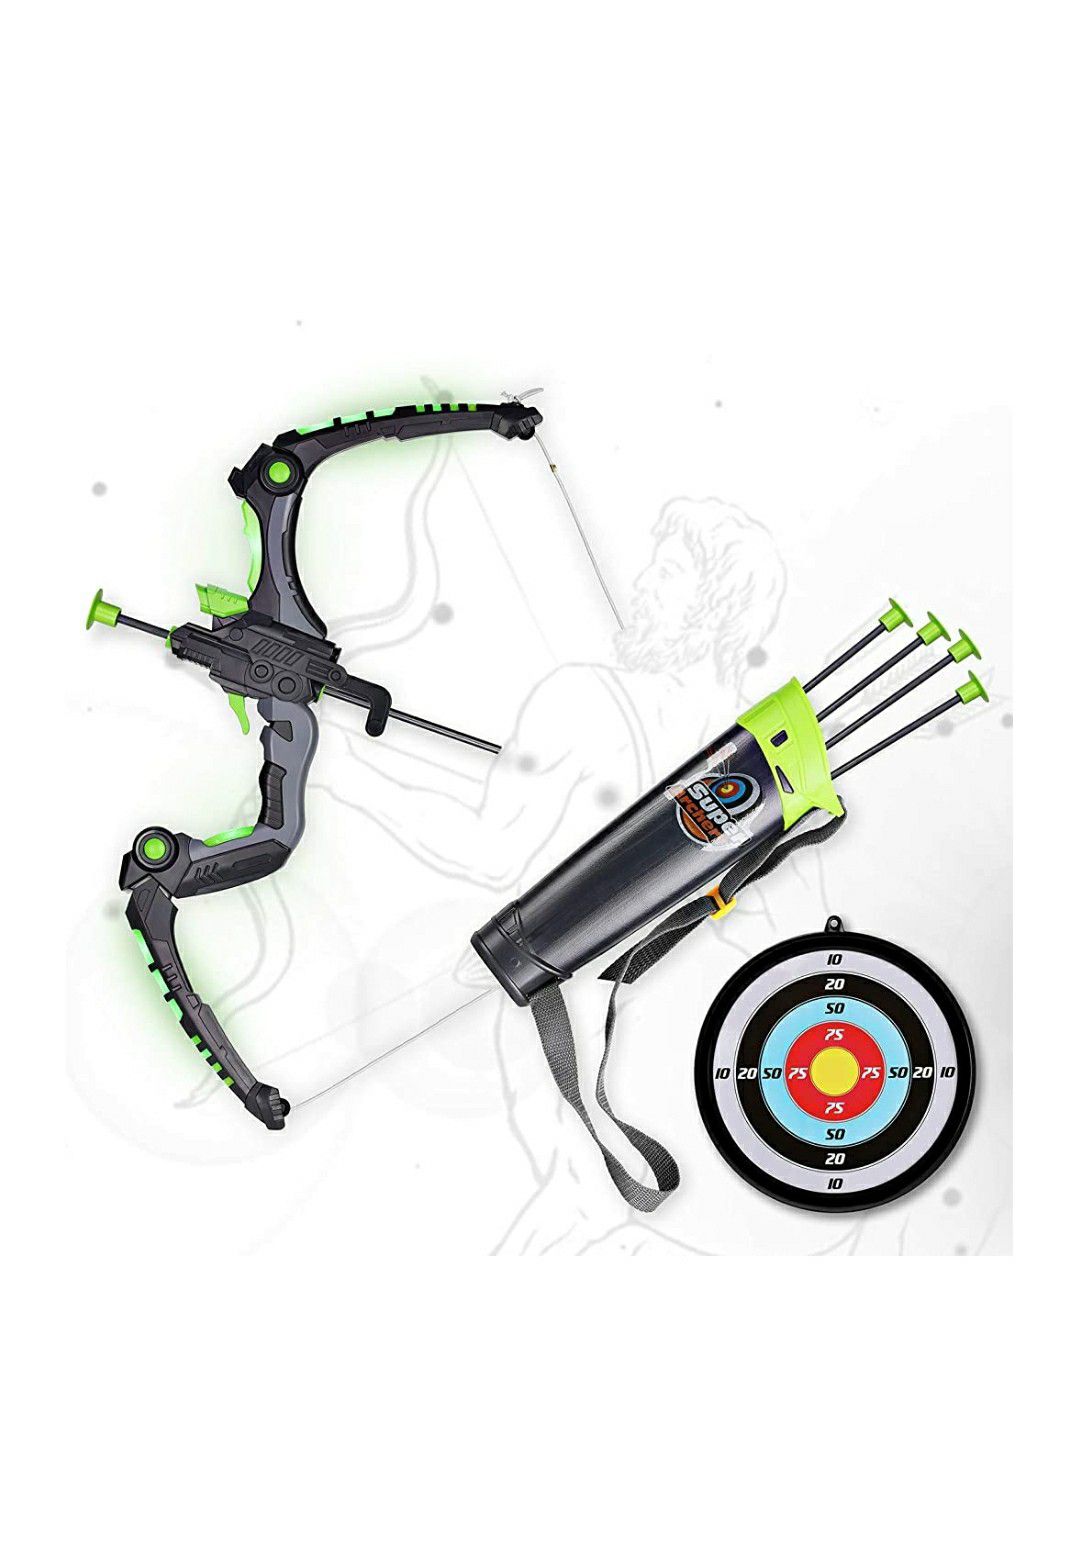 SainSmart Jr. Kids Bow and Arrows, Light Up Archery Set for Kids Outdoor Hunting Game with 5 Durable Suction Cup Arrows